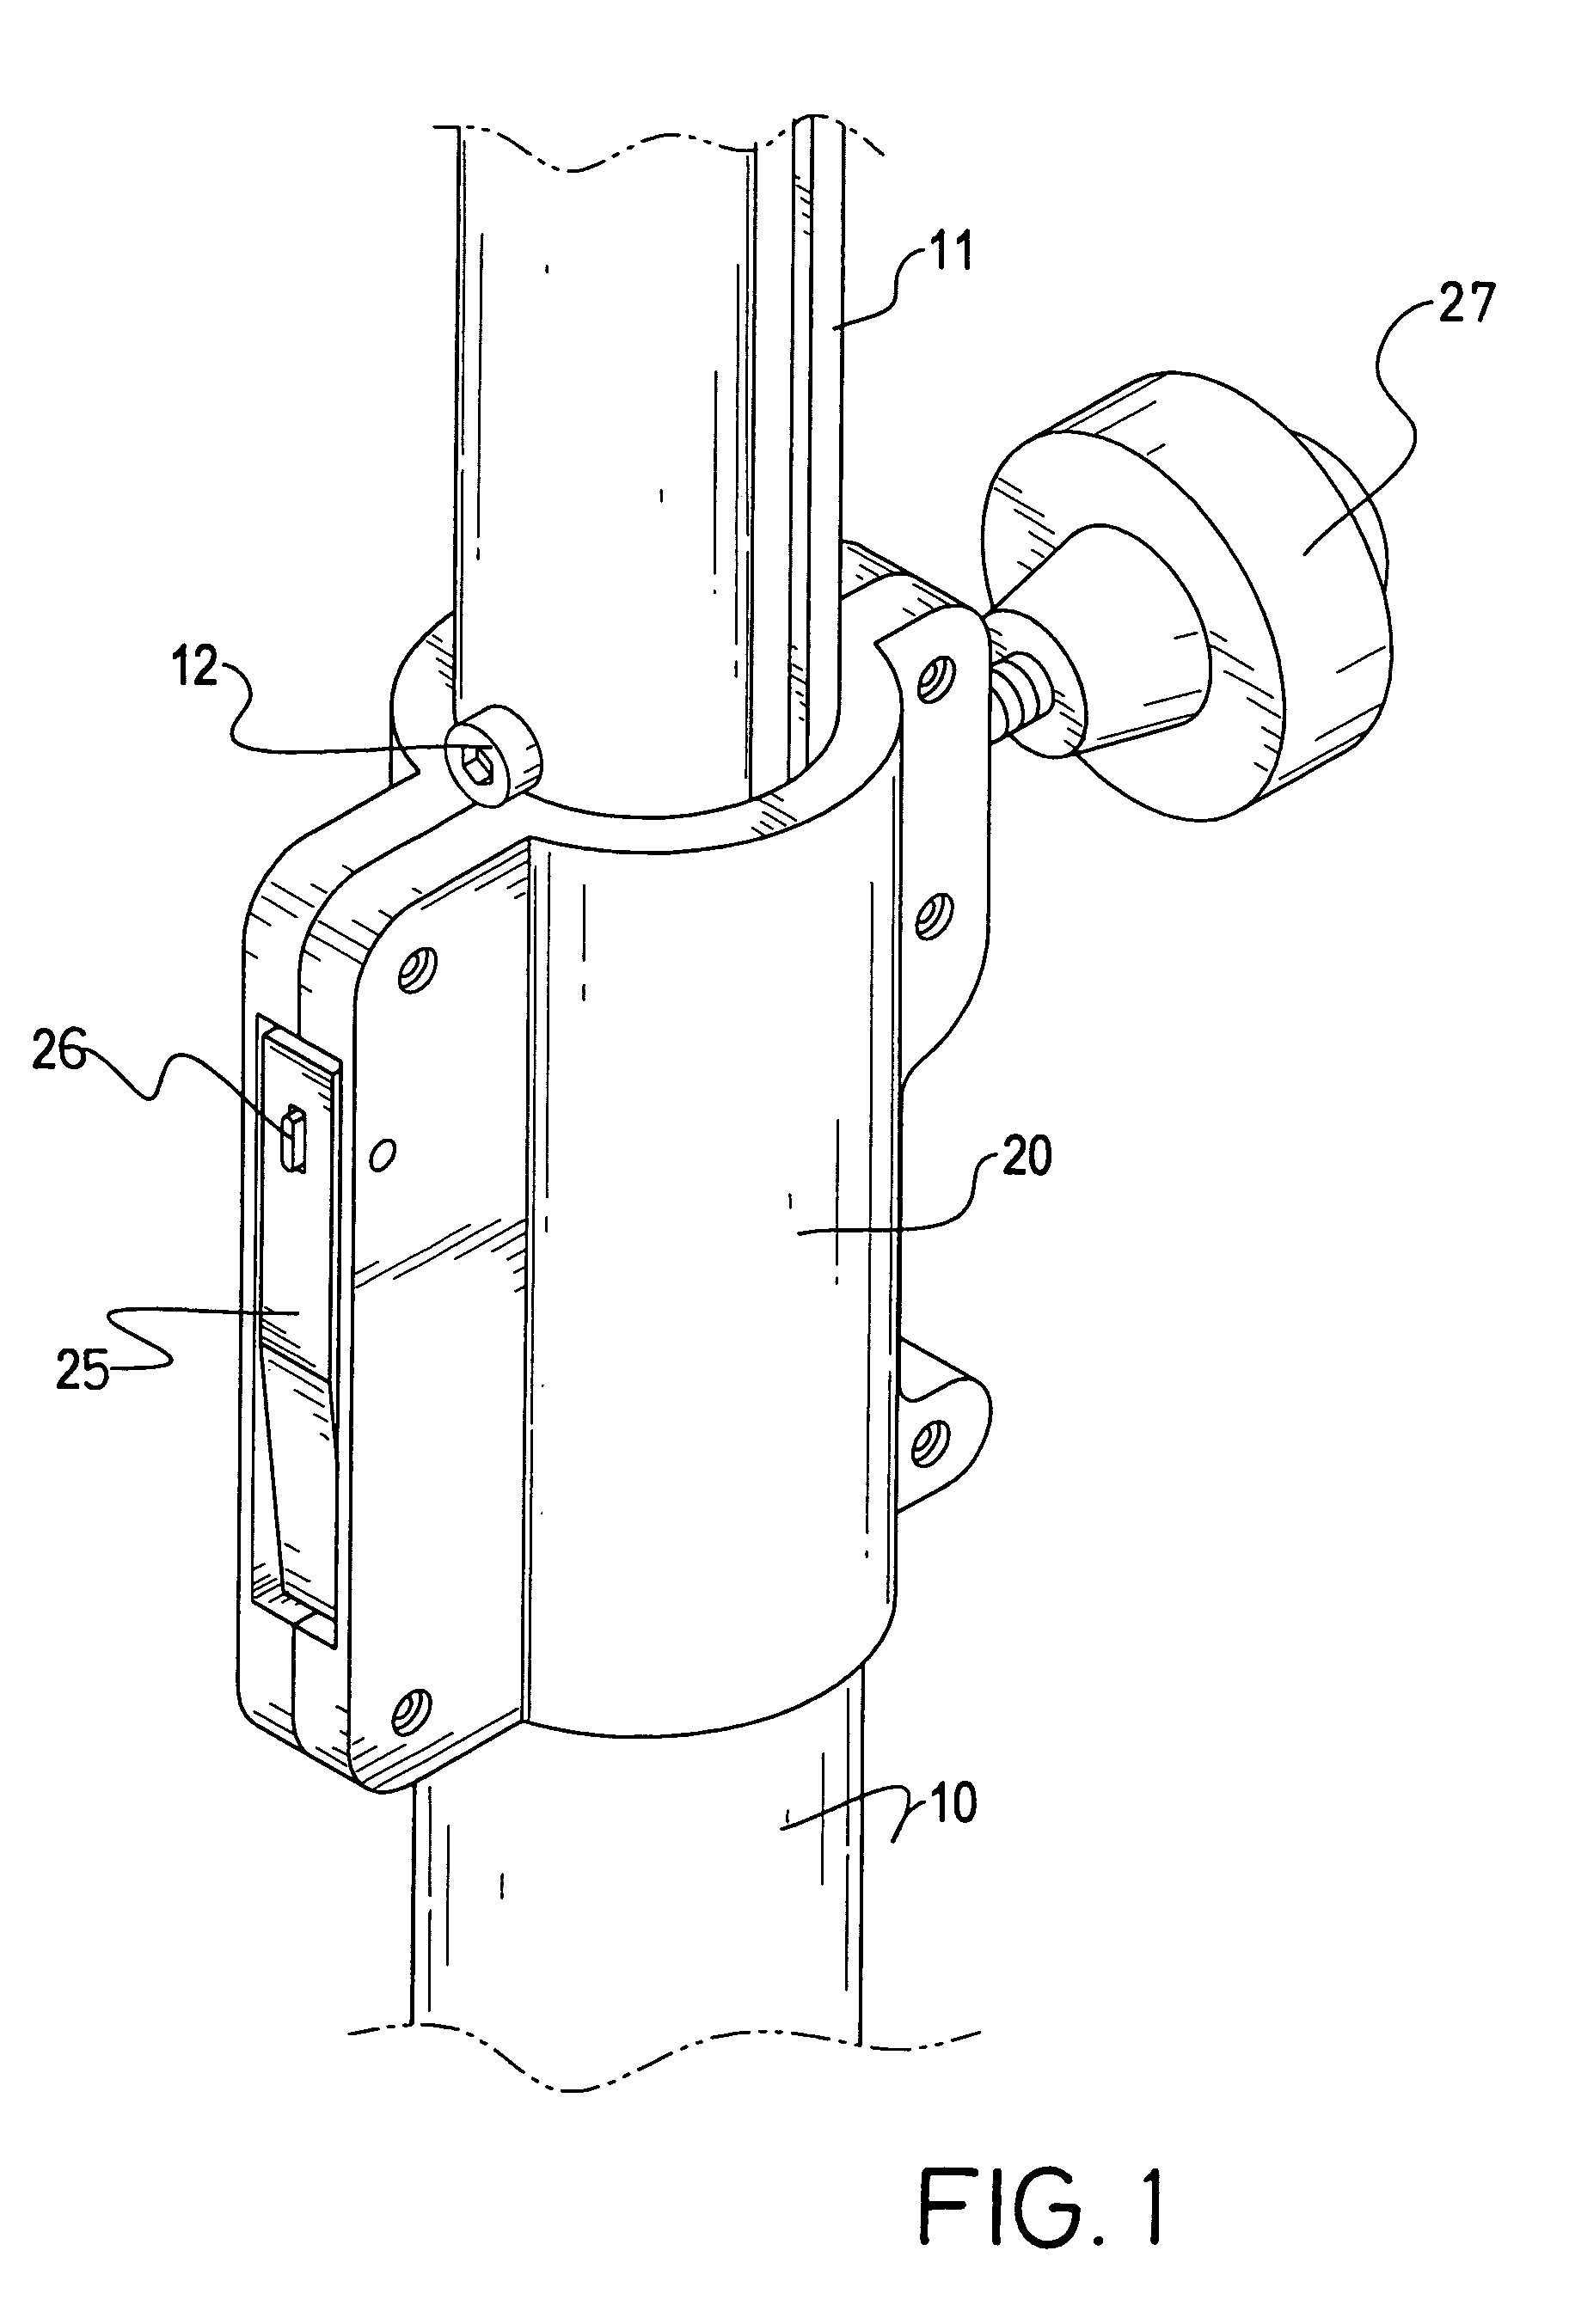 Locking device to secure a telescopic tube assembly